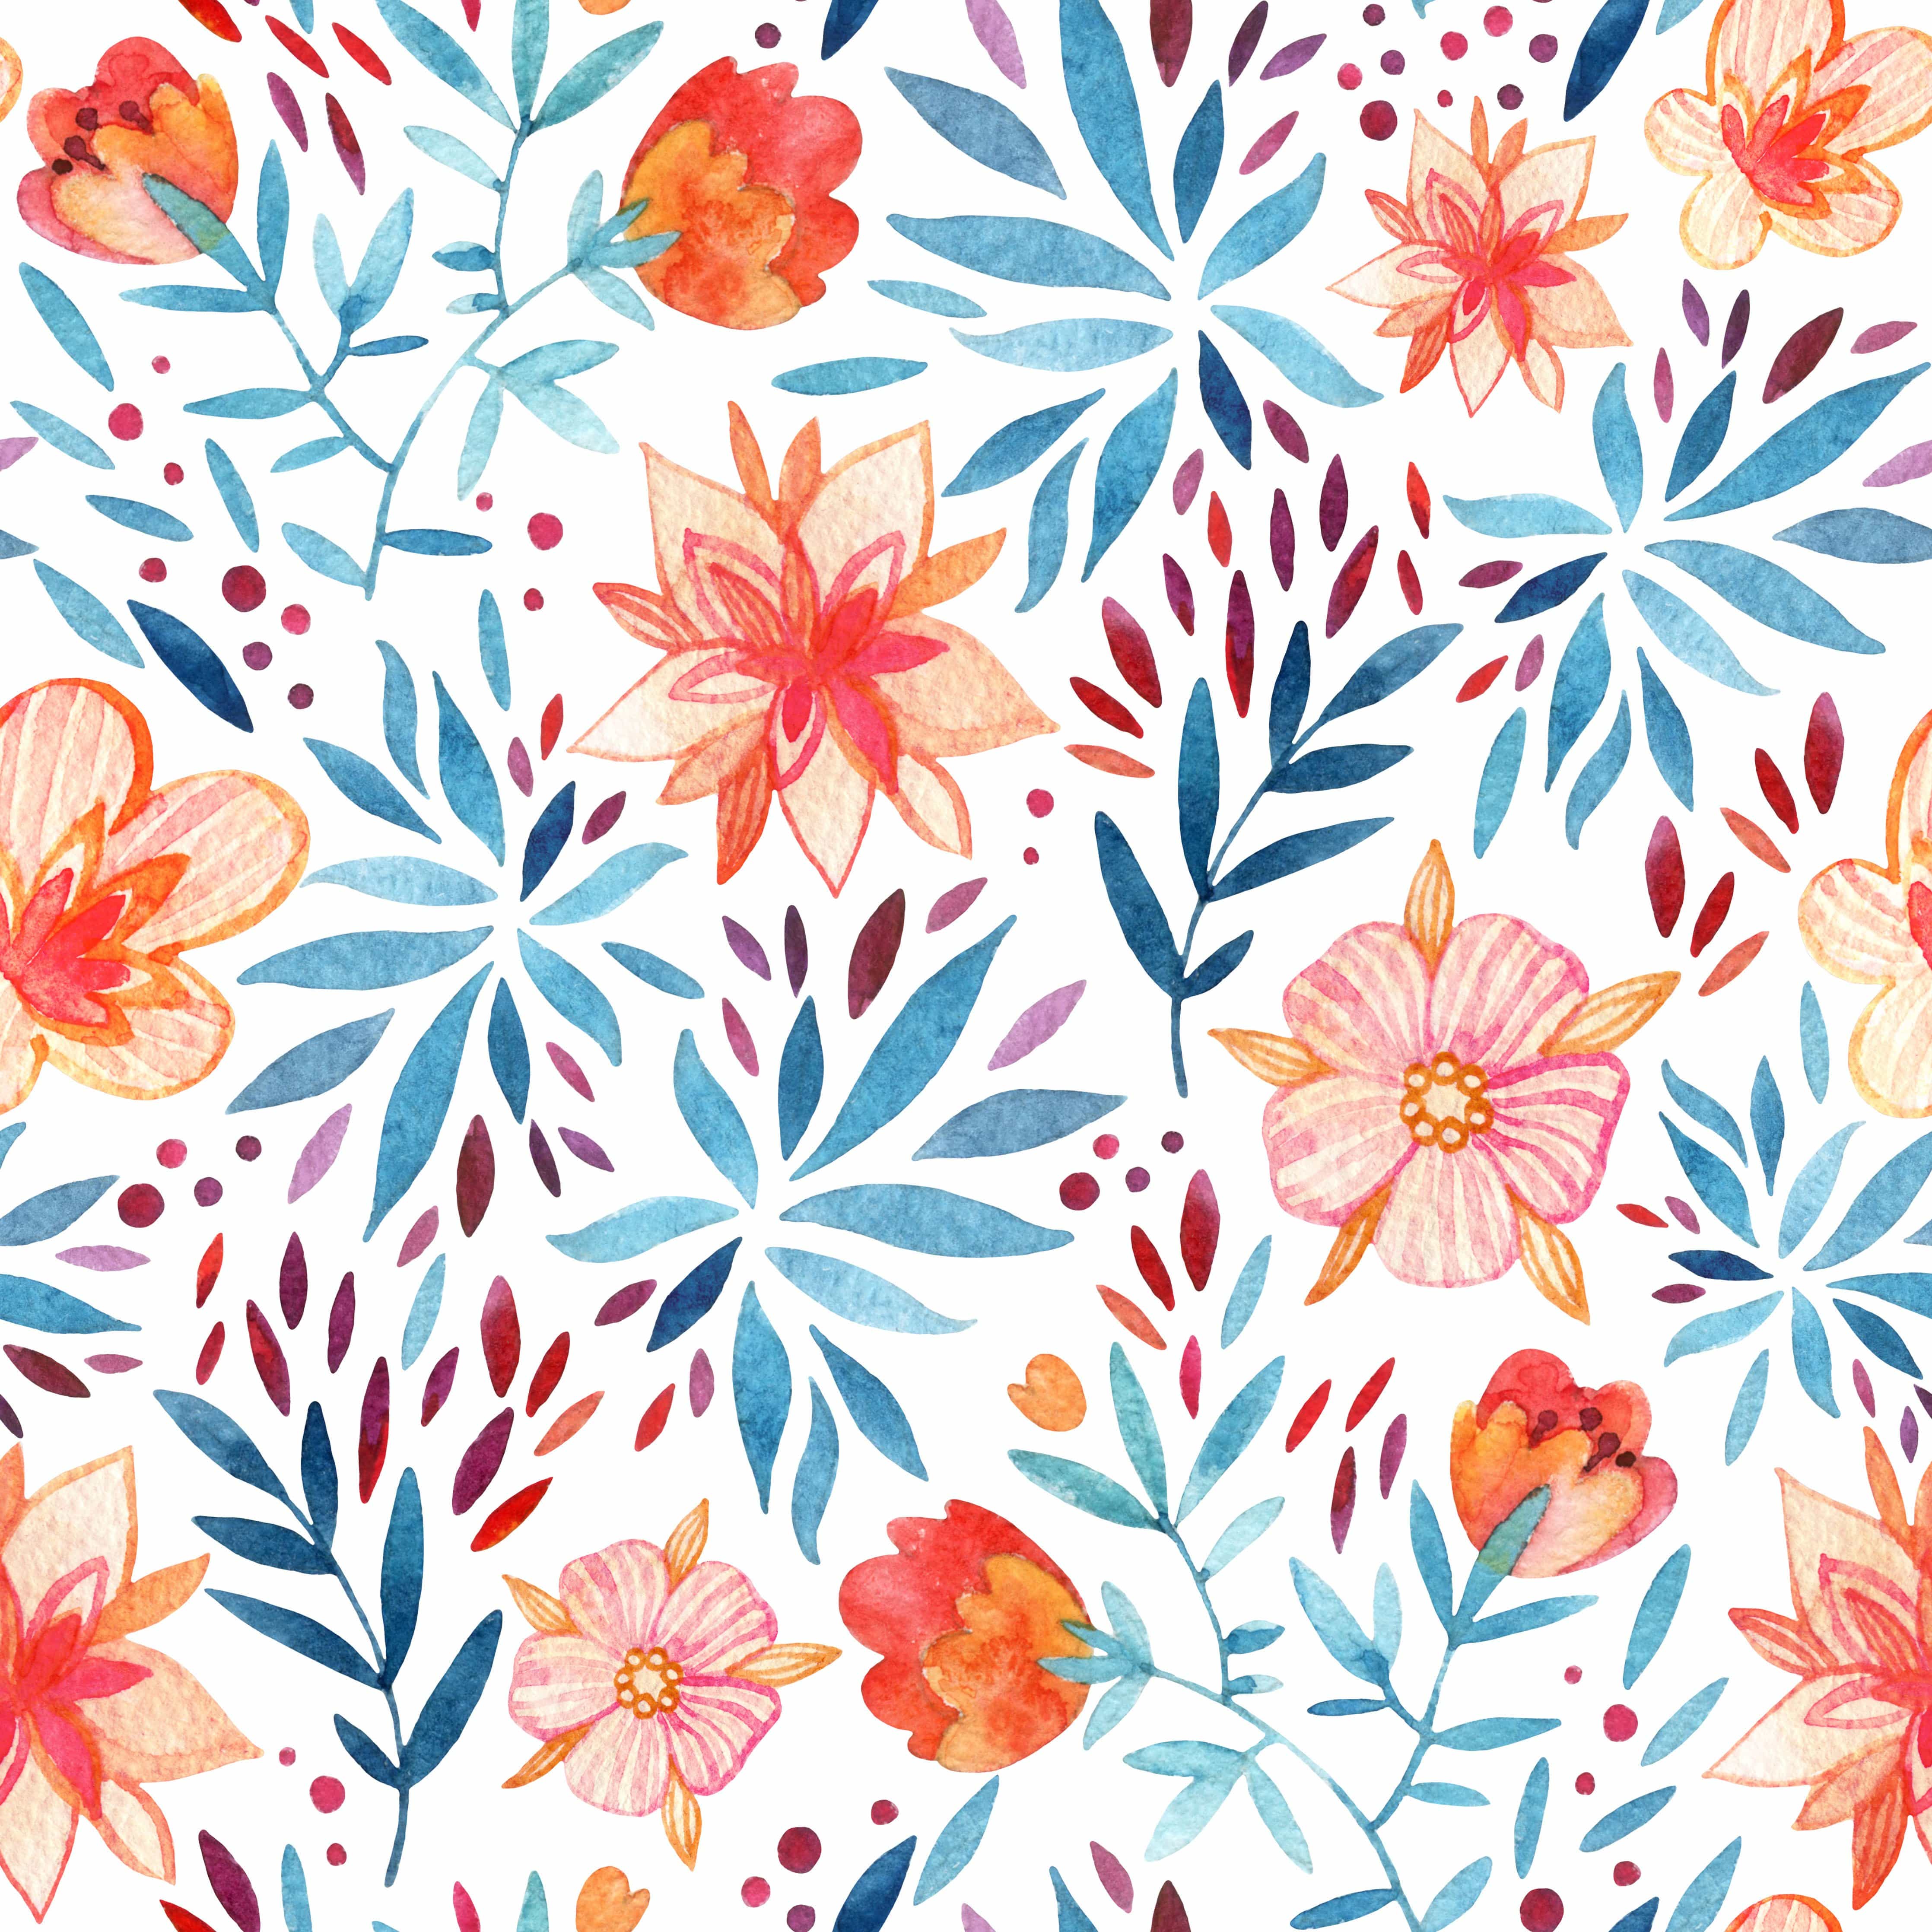 Abstract Cute Watercolor Floral Wallpaper